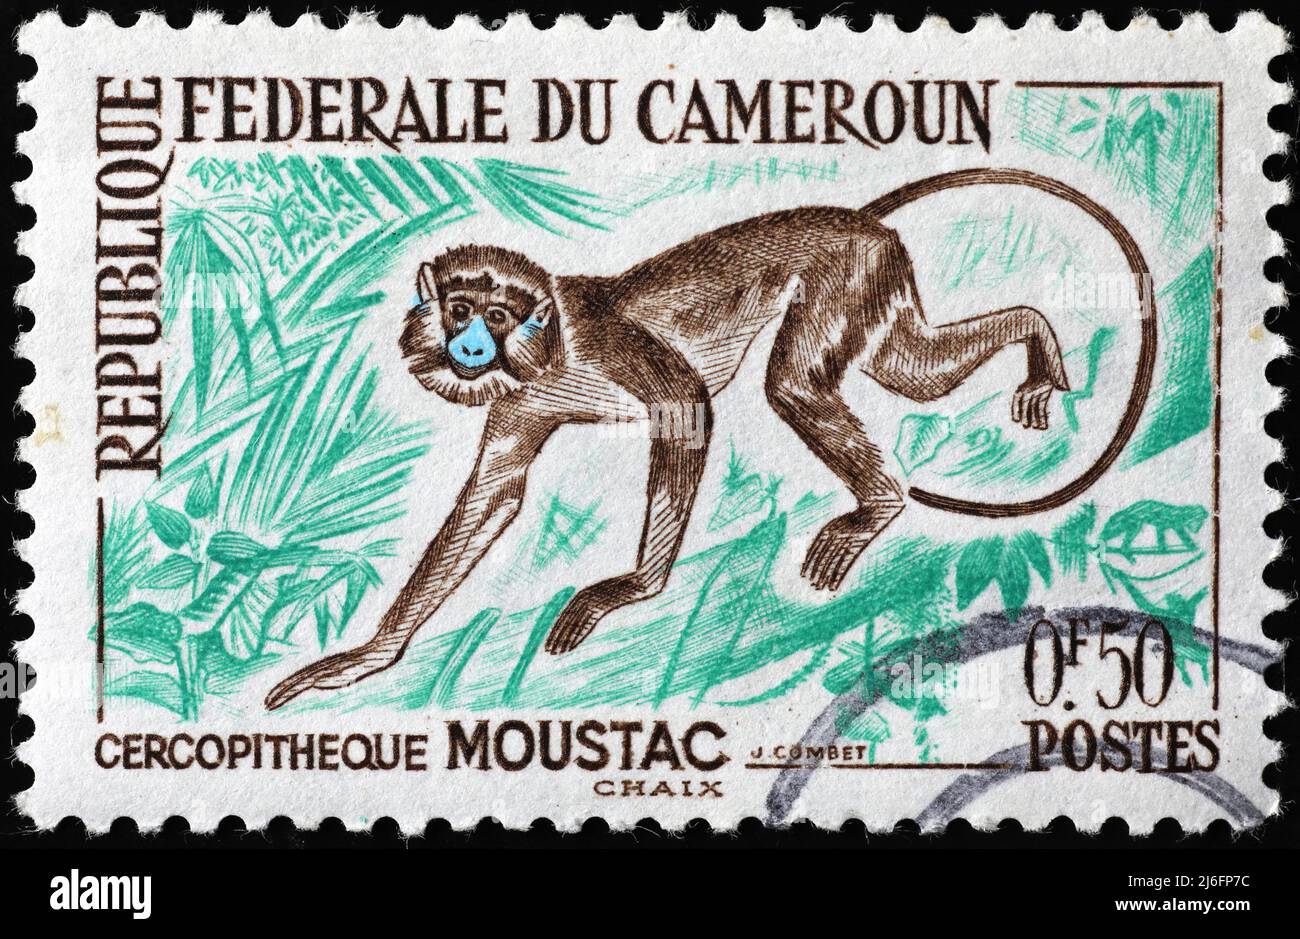 Moustached guenon on old postage stamp fom Cameroon Stock Photo